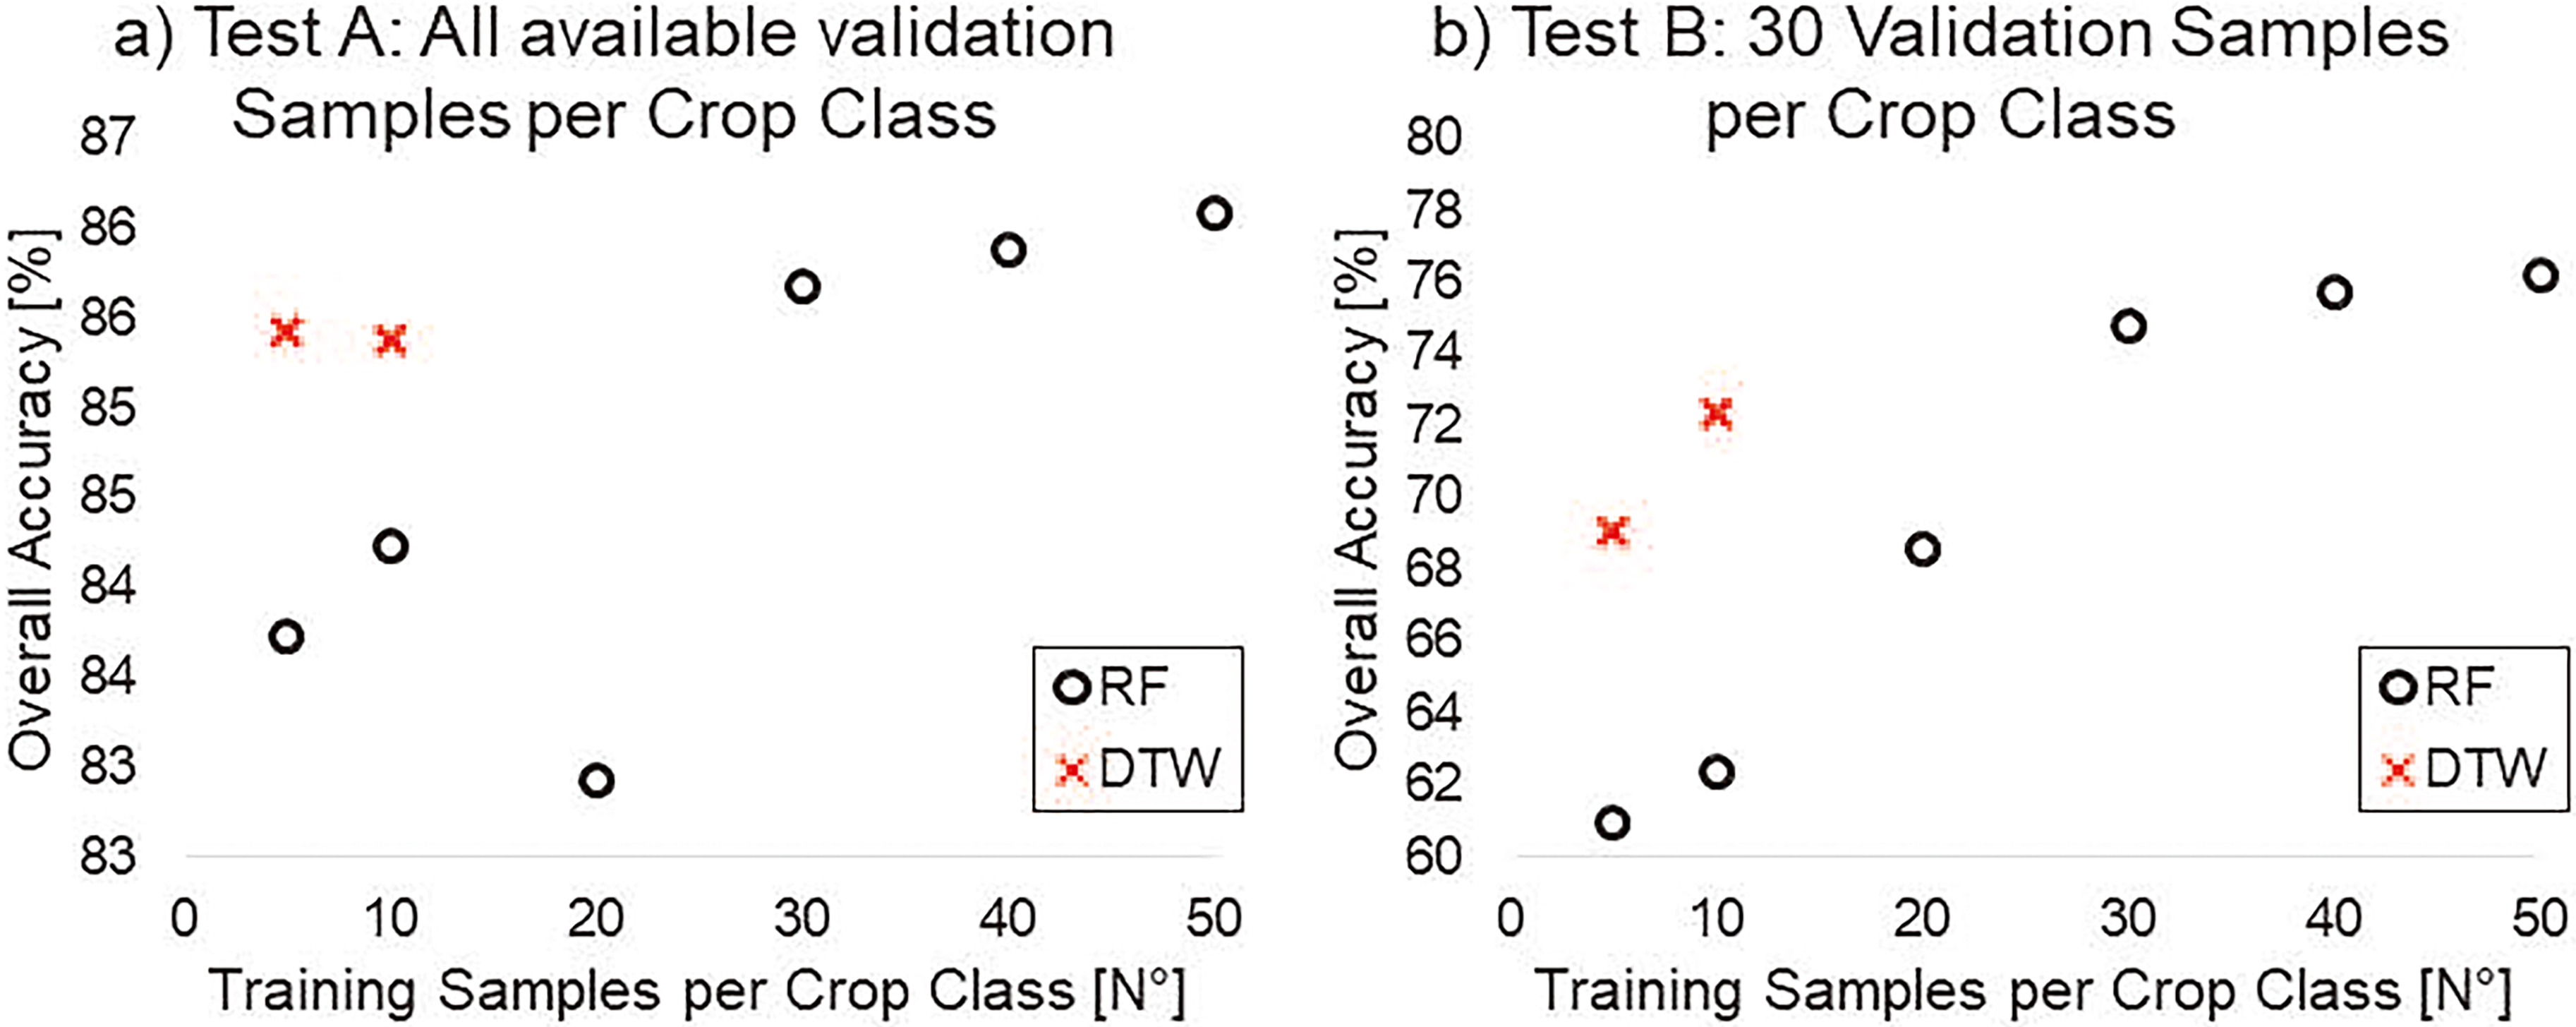 Overall accuracy of the DTW and RF classifiers as a function of the number of training samples used. In a) all validation data points were used to assess the OA. In b) only 30 validation data points were used to assess the OA. In both a) and b) the DTW scores significantly higher OA than to RF, when 5 to 20 samples are used for training. Only when 30 or more training samples are used, the RF scores higher OA compared to DTW.